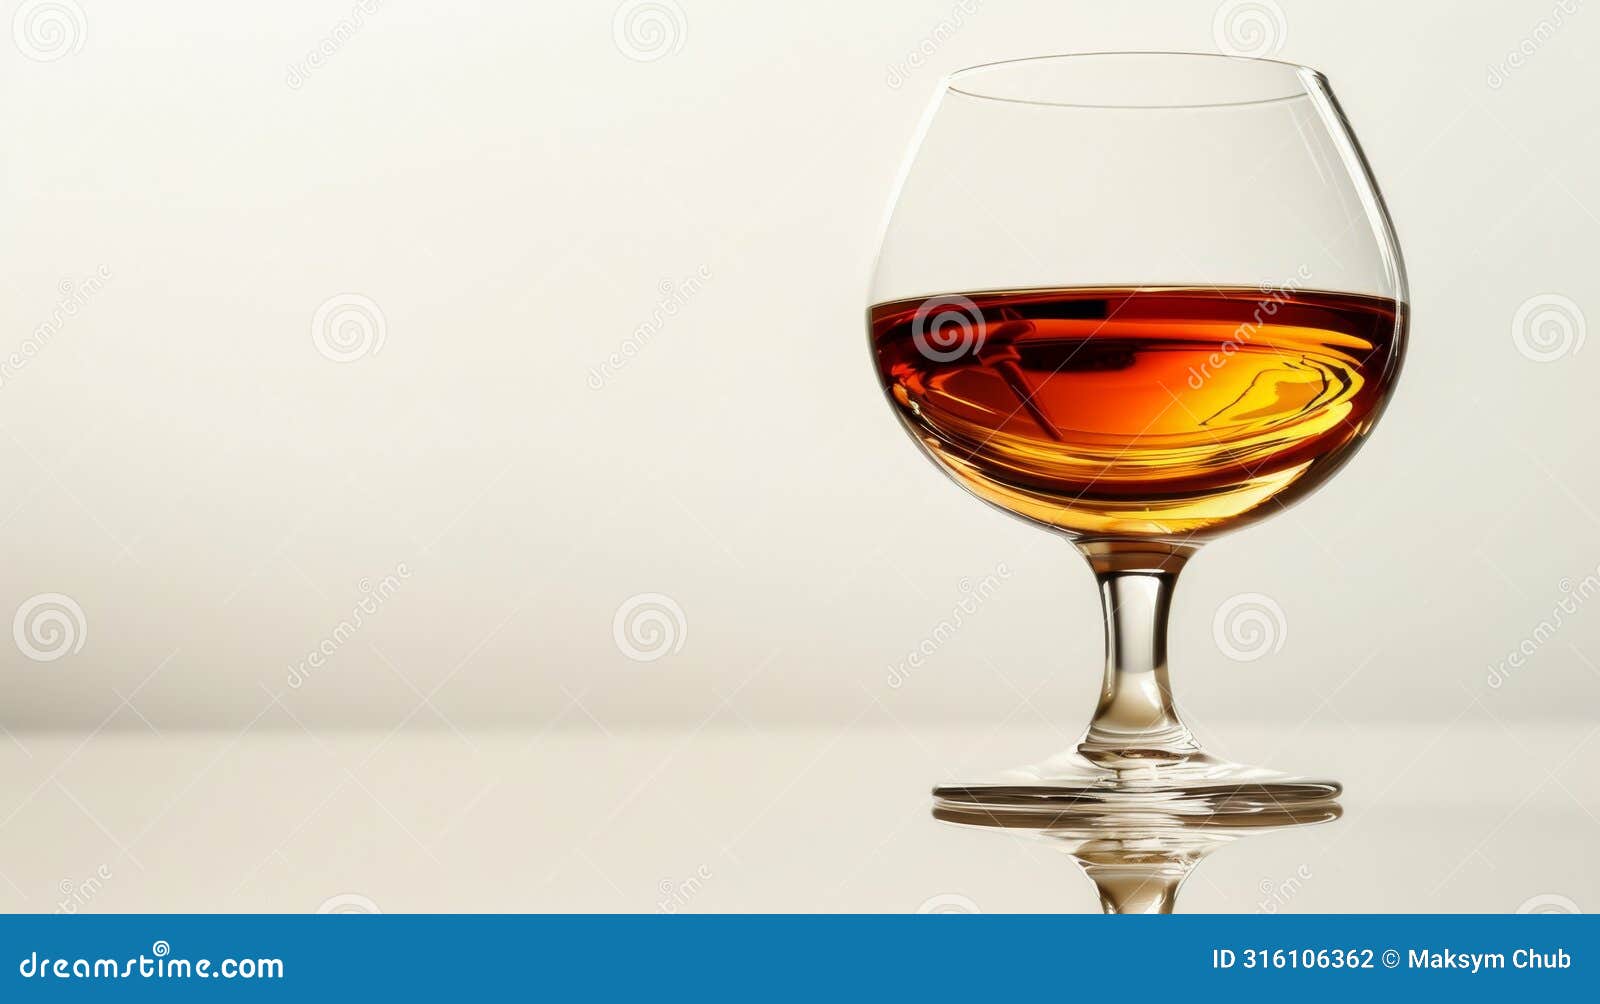 elegant cocktail in chic glass on white background exuding luxury and refinement